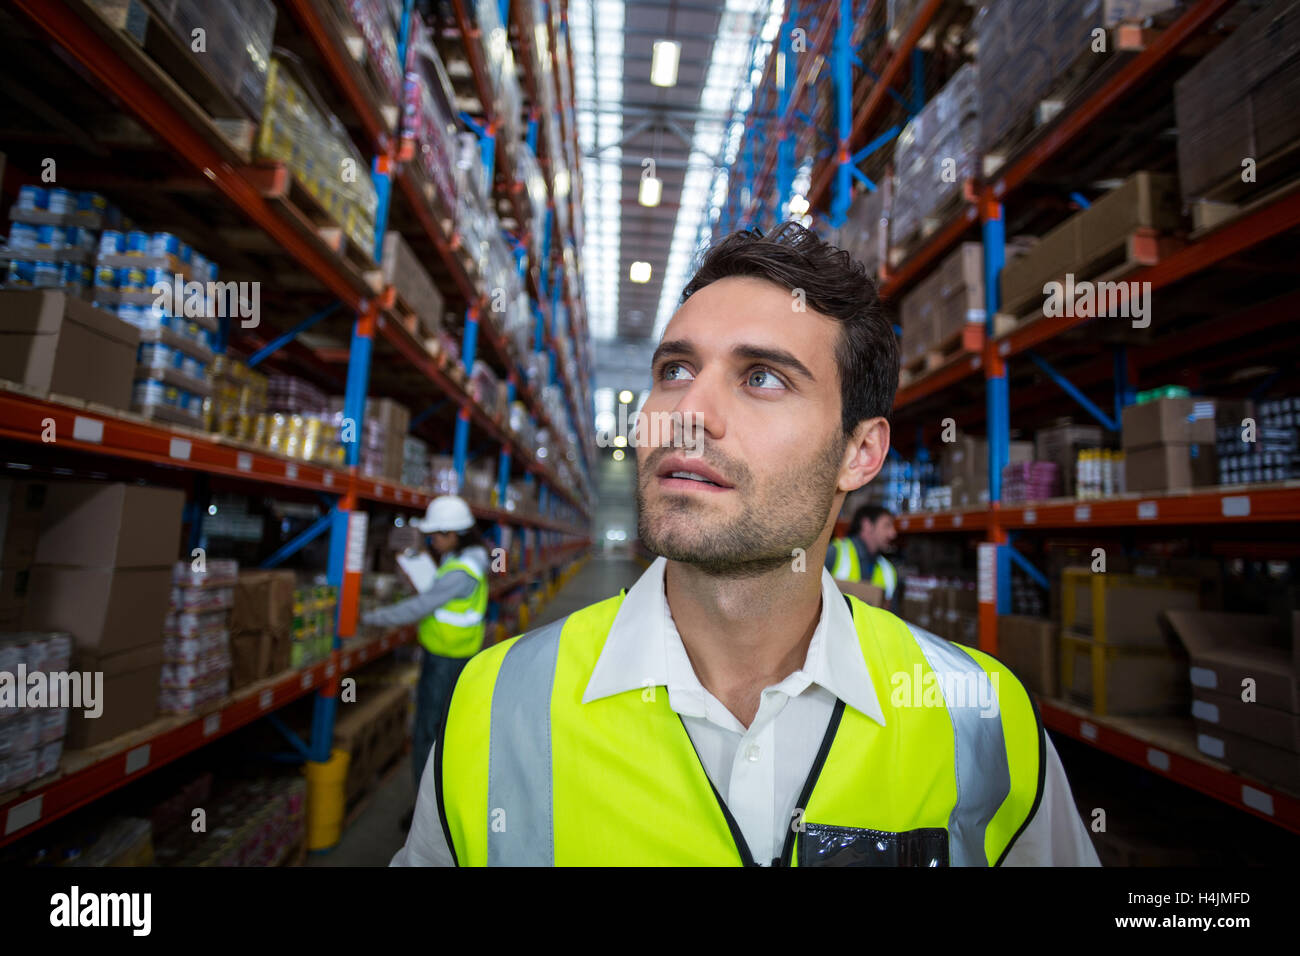 Warehouse worker looking at packages Stock Photo